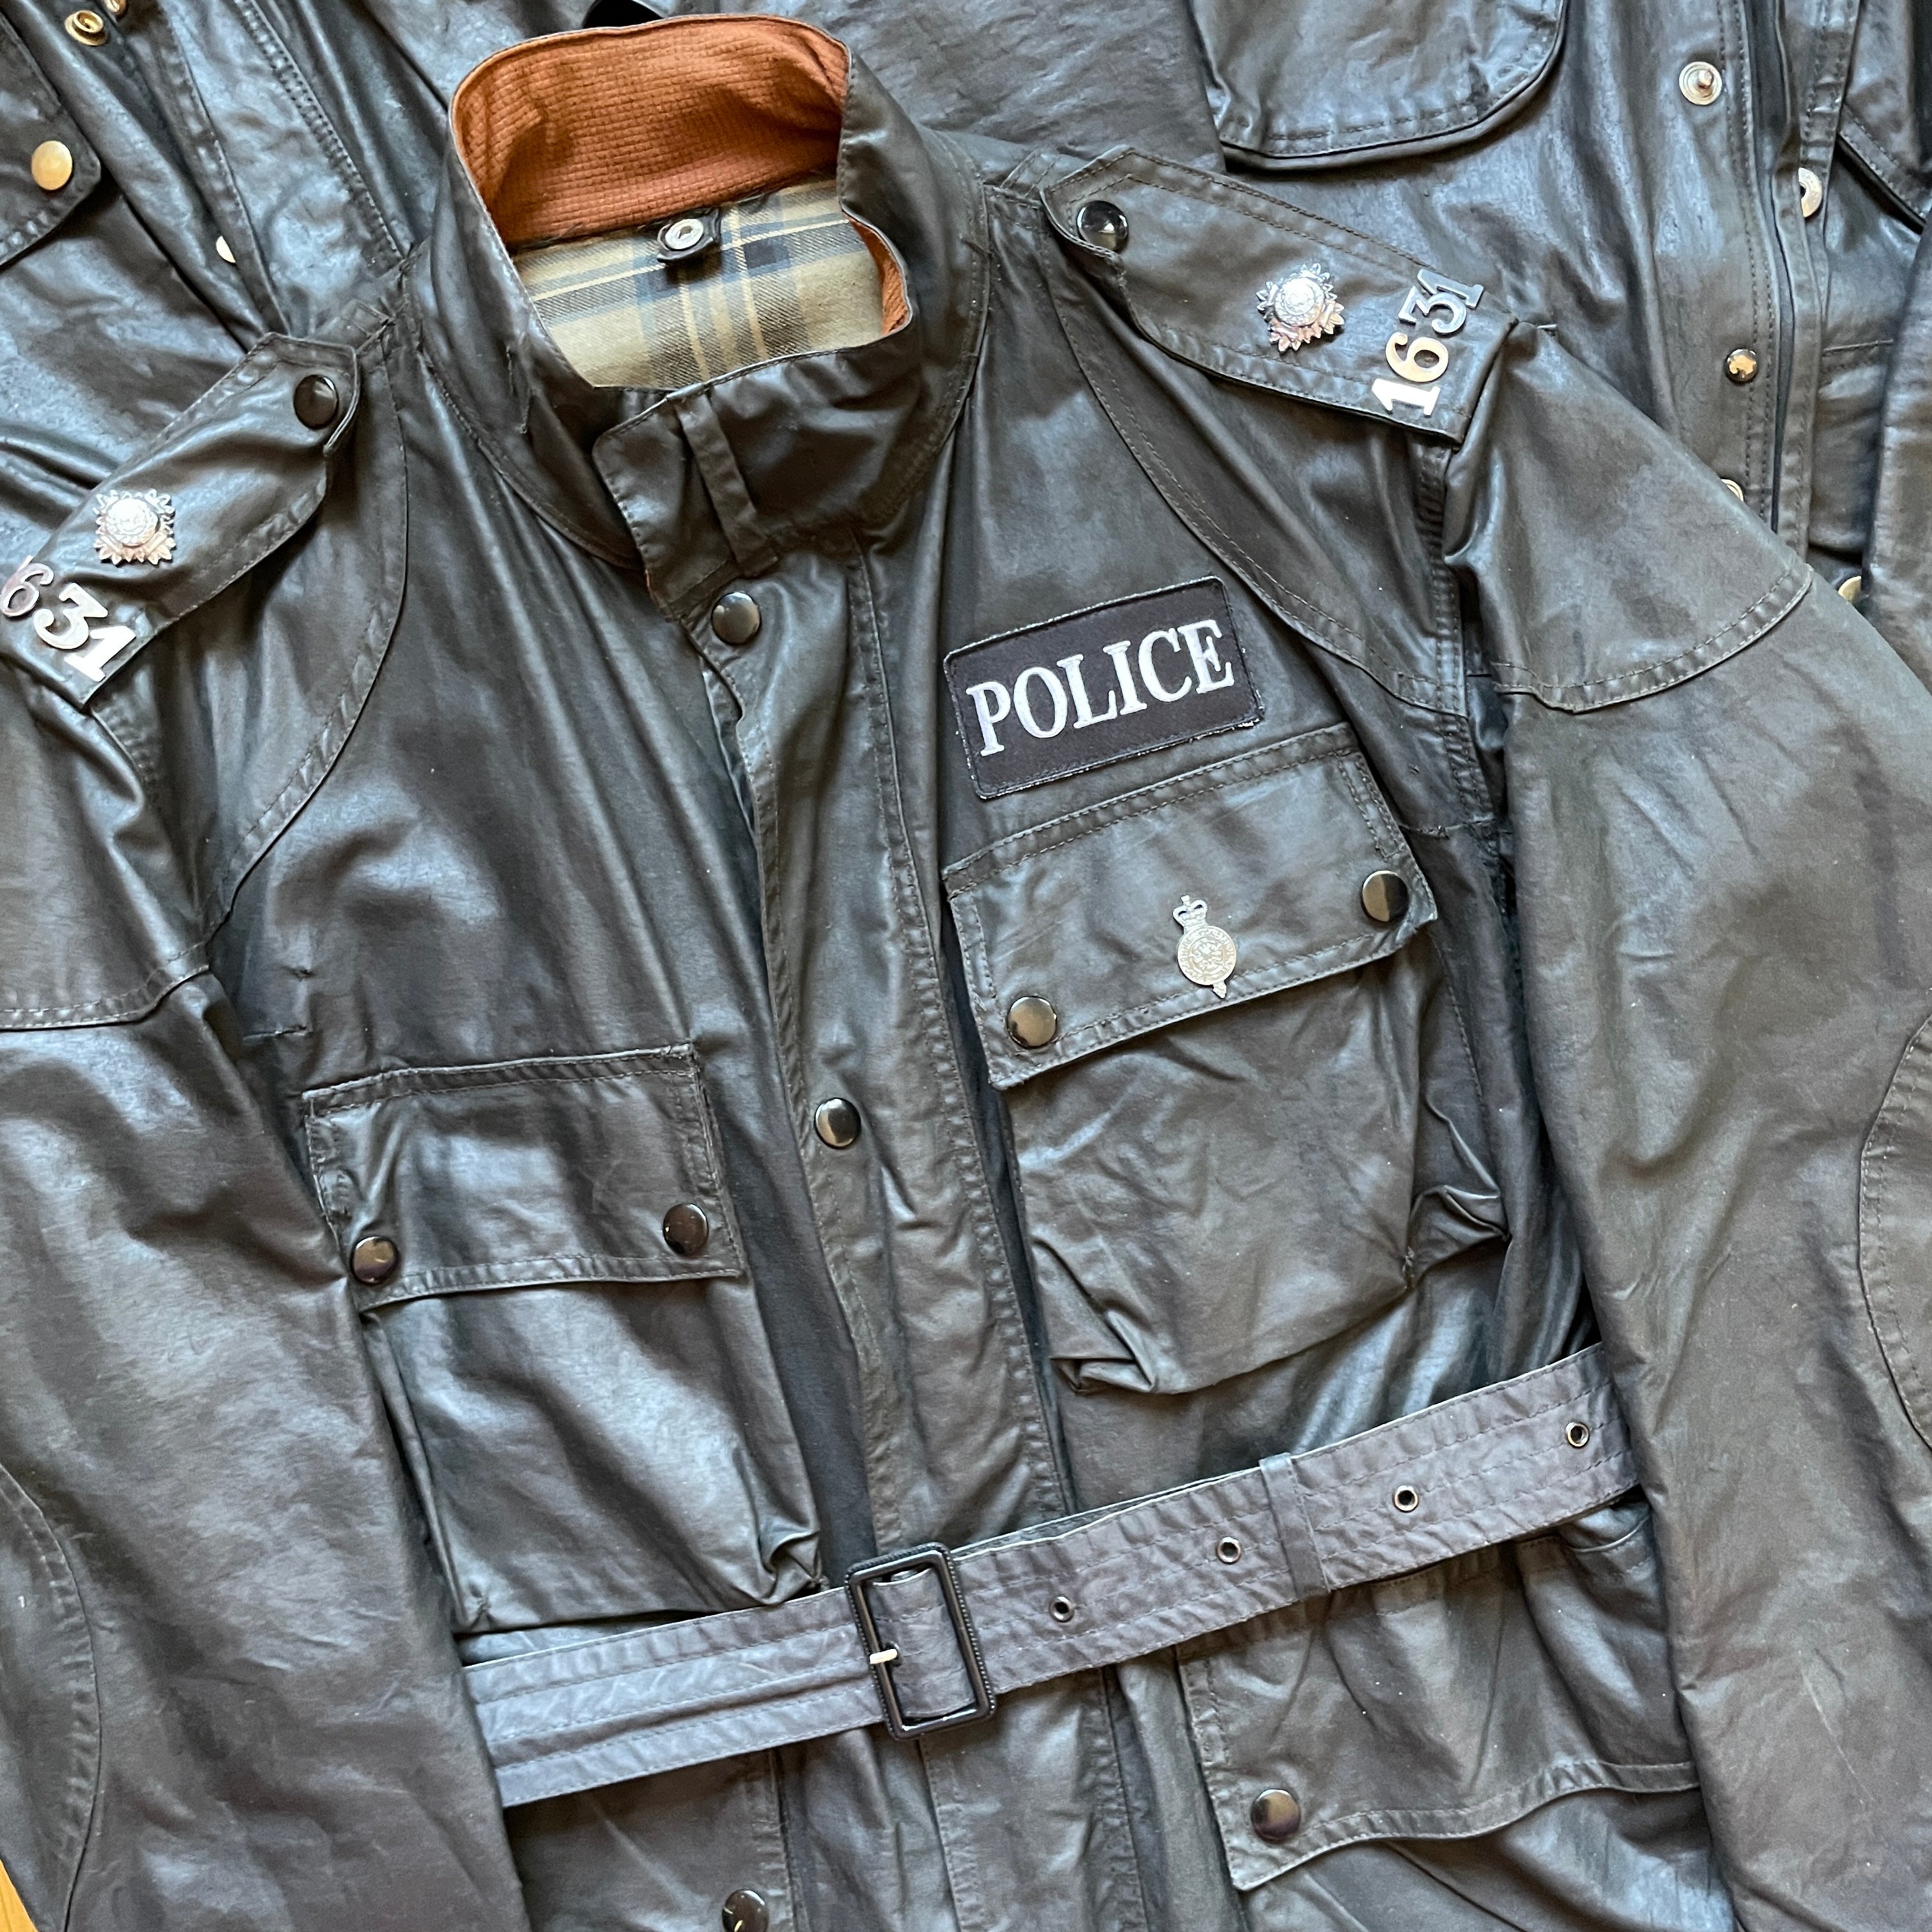 Belstaff 1960s Police Issue Trialmaster – The Major's Tailor